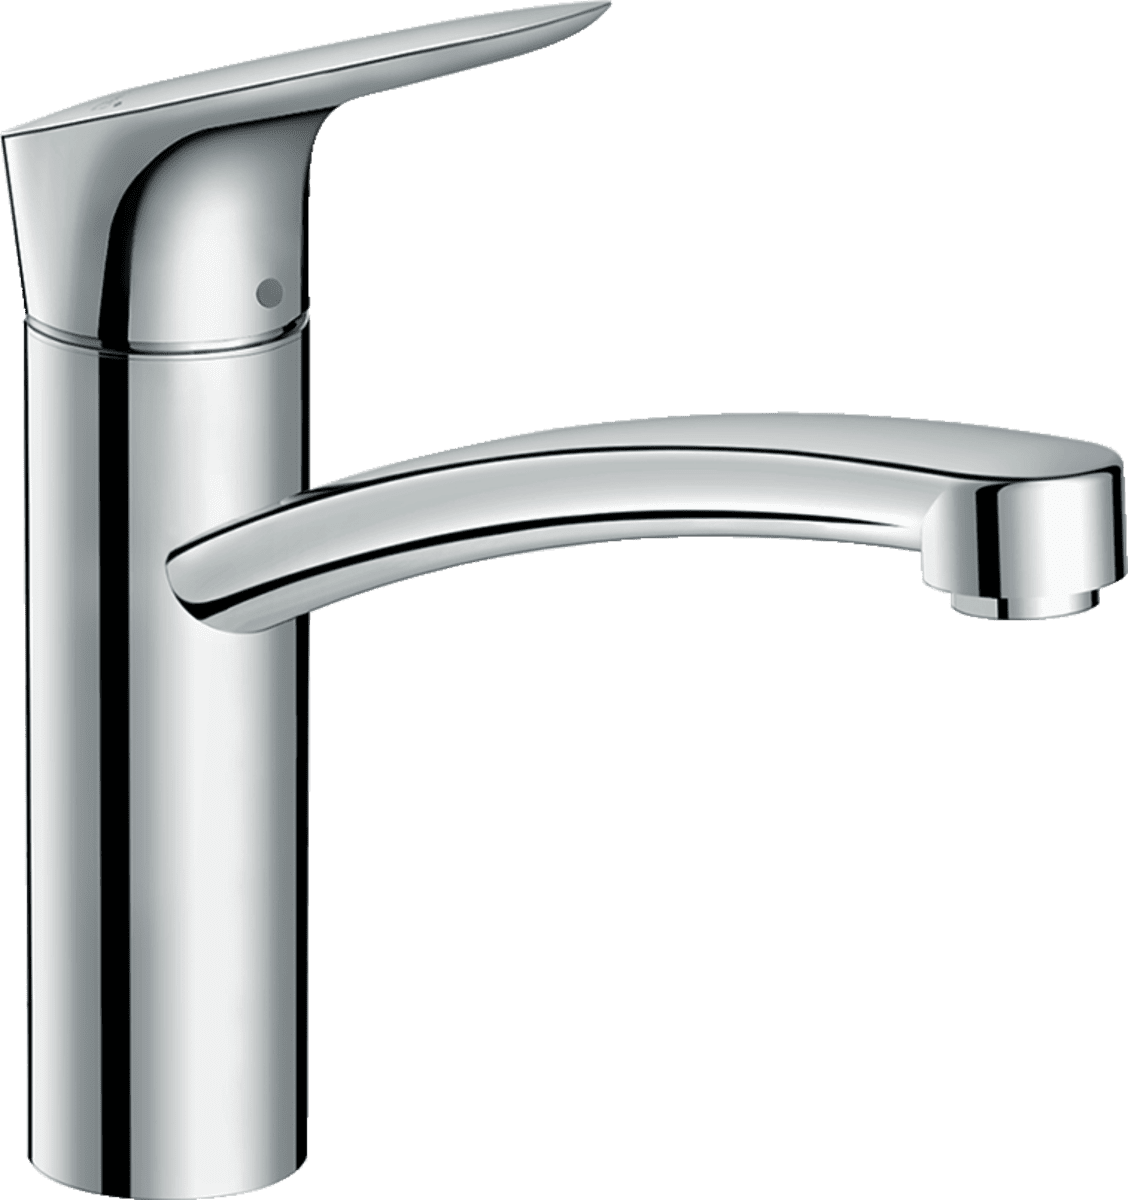 Picture of HANSGROHE Logis M31 Single lever kitchen mixer 160, CoolStart, EcoSelection, 1jet #71839000 - Chrome